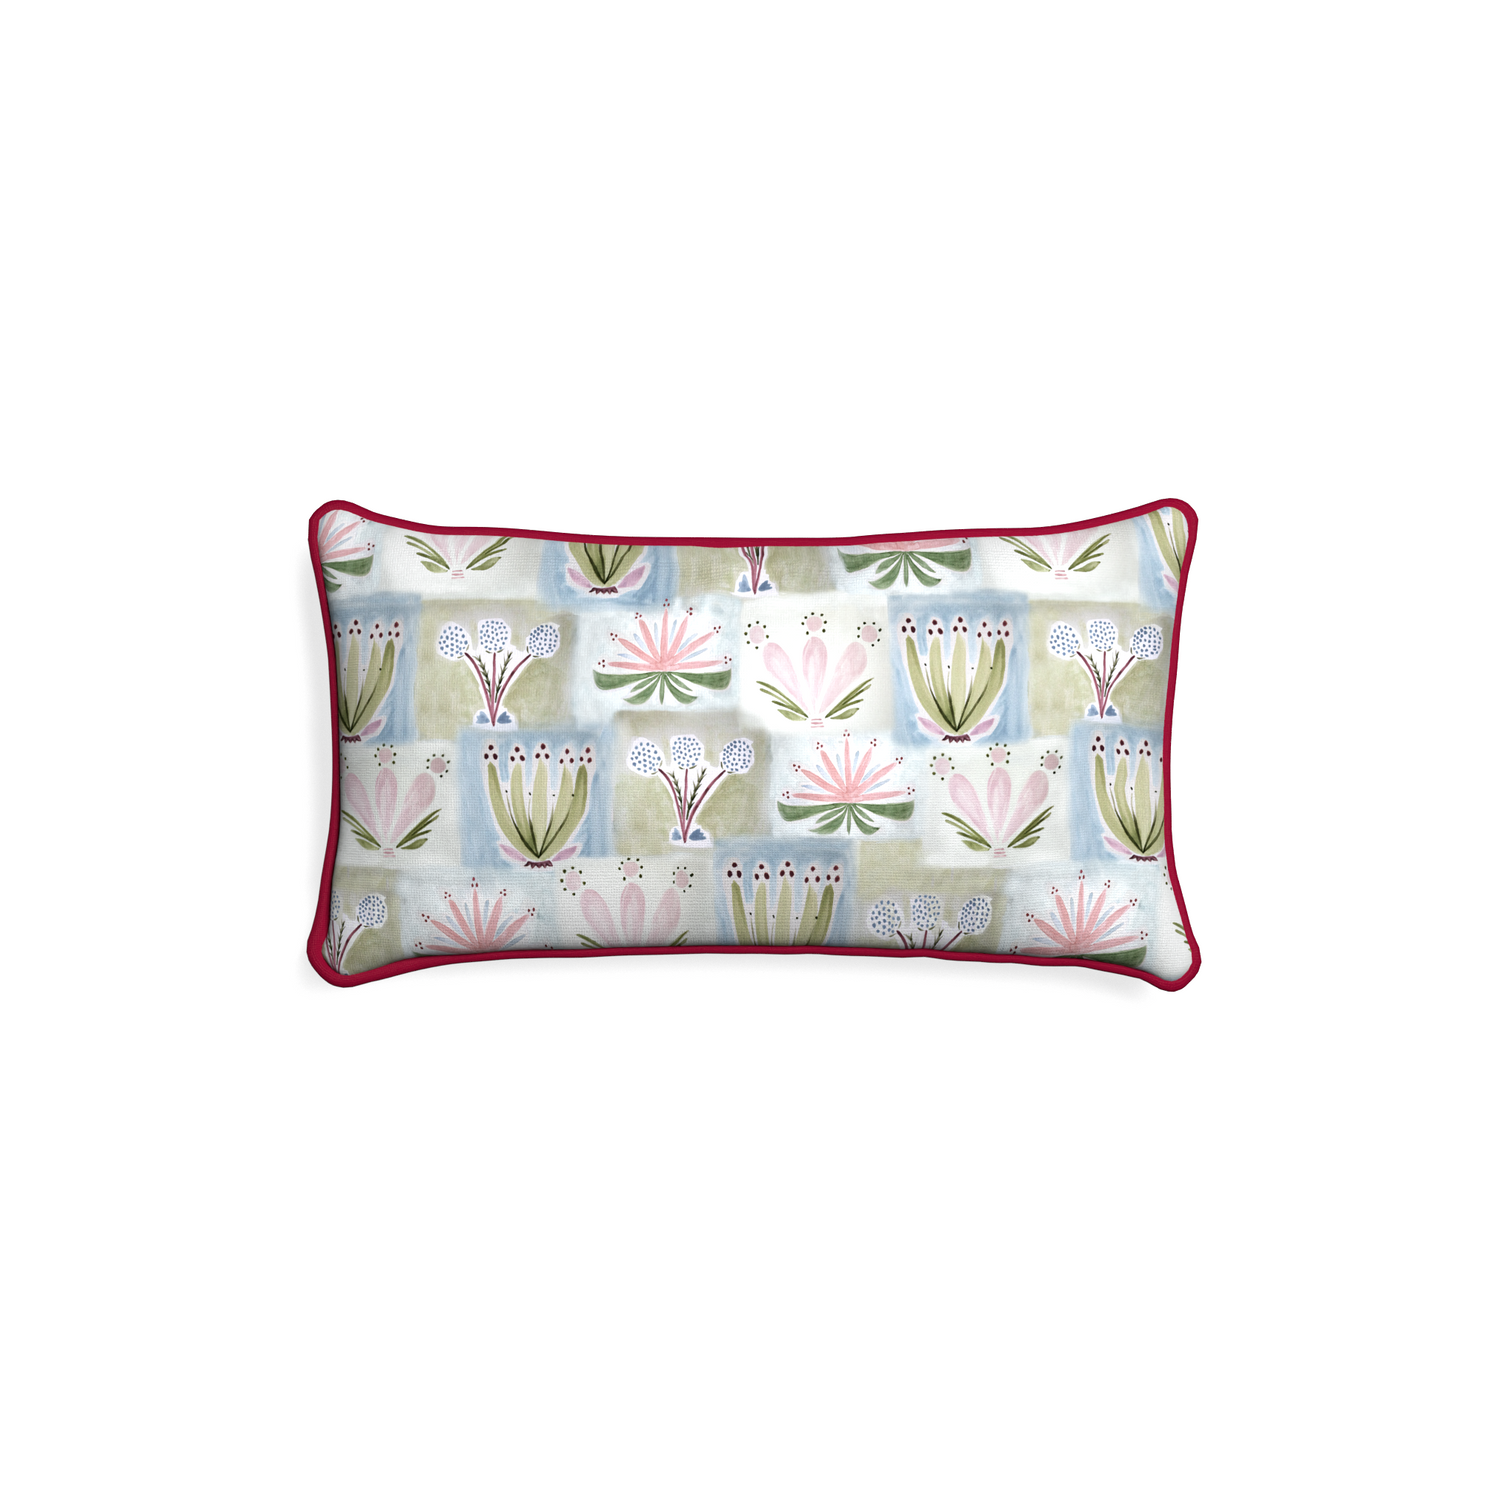 Petite-lumbar harper custom hand-painted floralpillow with raspberry piping on white background